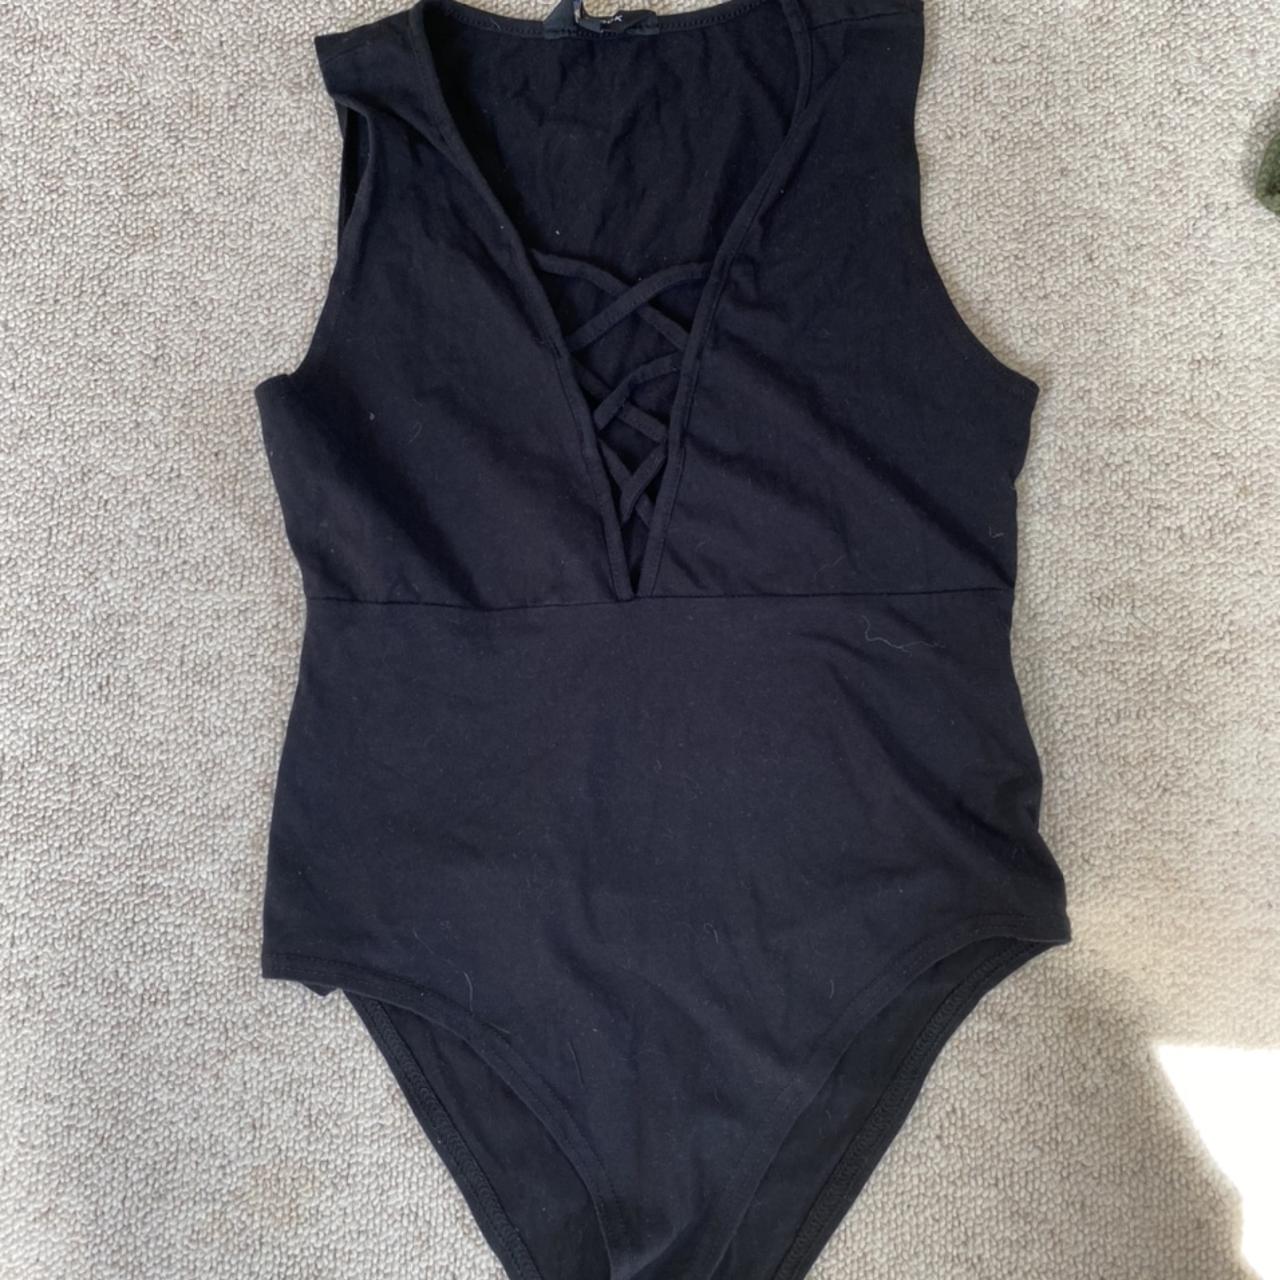 PLUNGE STRAP BODY Sexy detail perfect for a night... - Depop